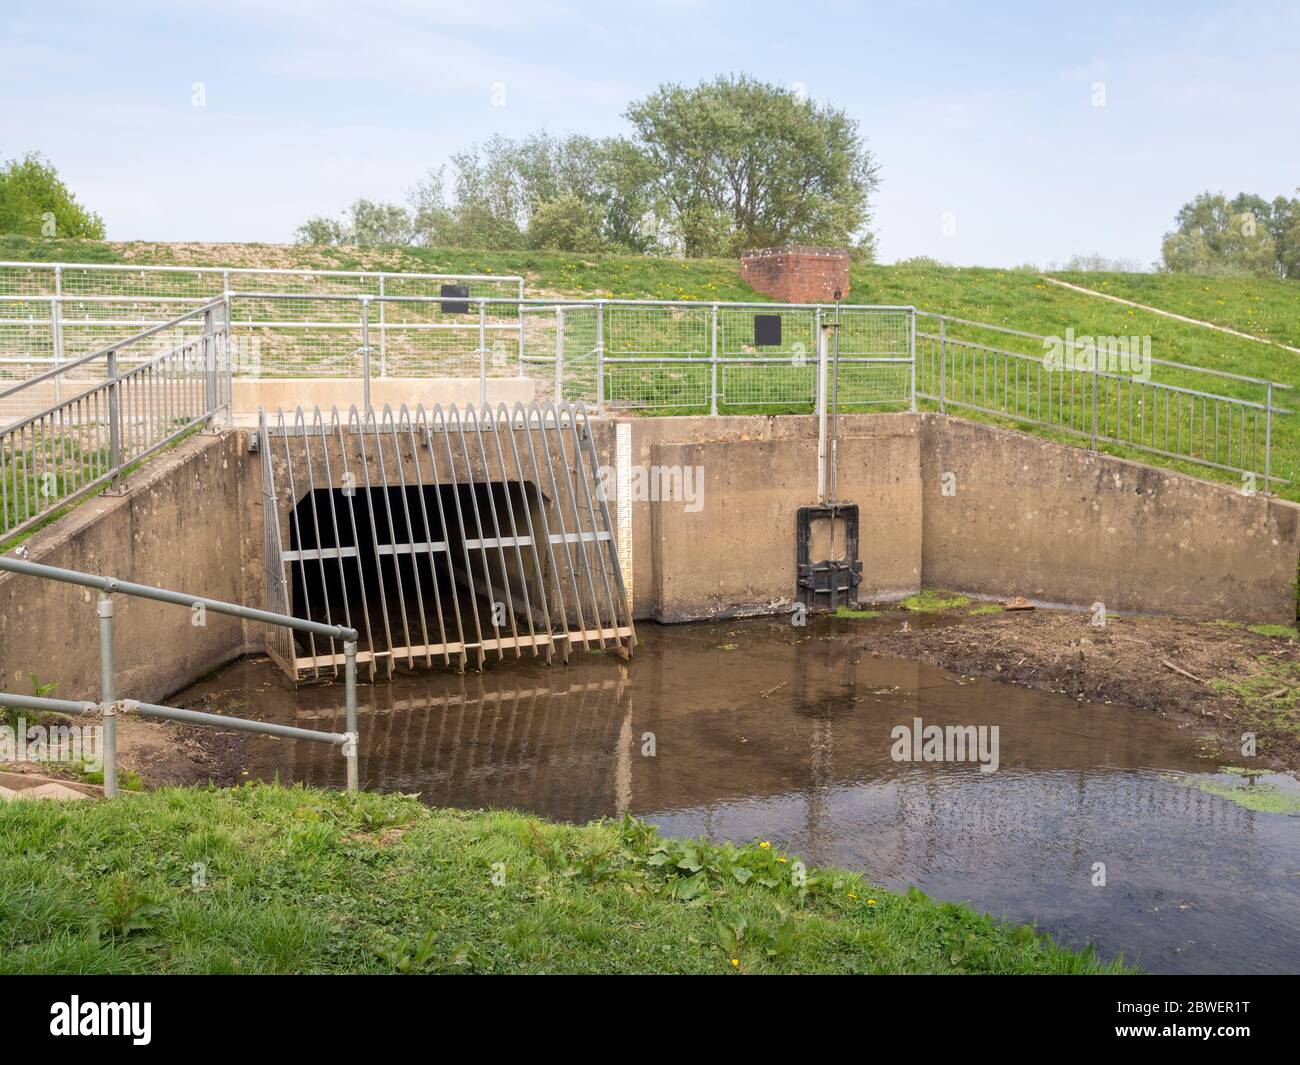 BIDEFORD, NORTH DEVON, UK - APRIL 24 2020: Water management in Kenwith Valley Local Nature Reserve. Part of the North Devon Biosphere. Stock Photo